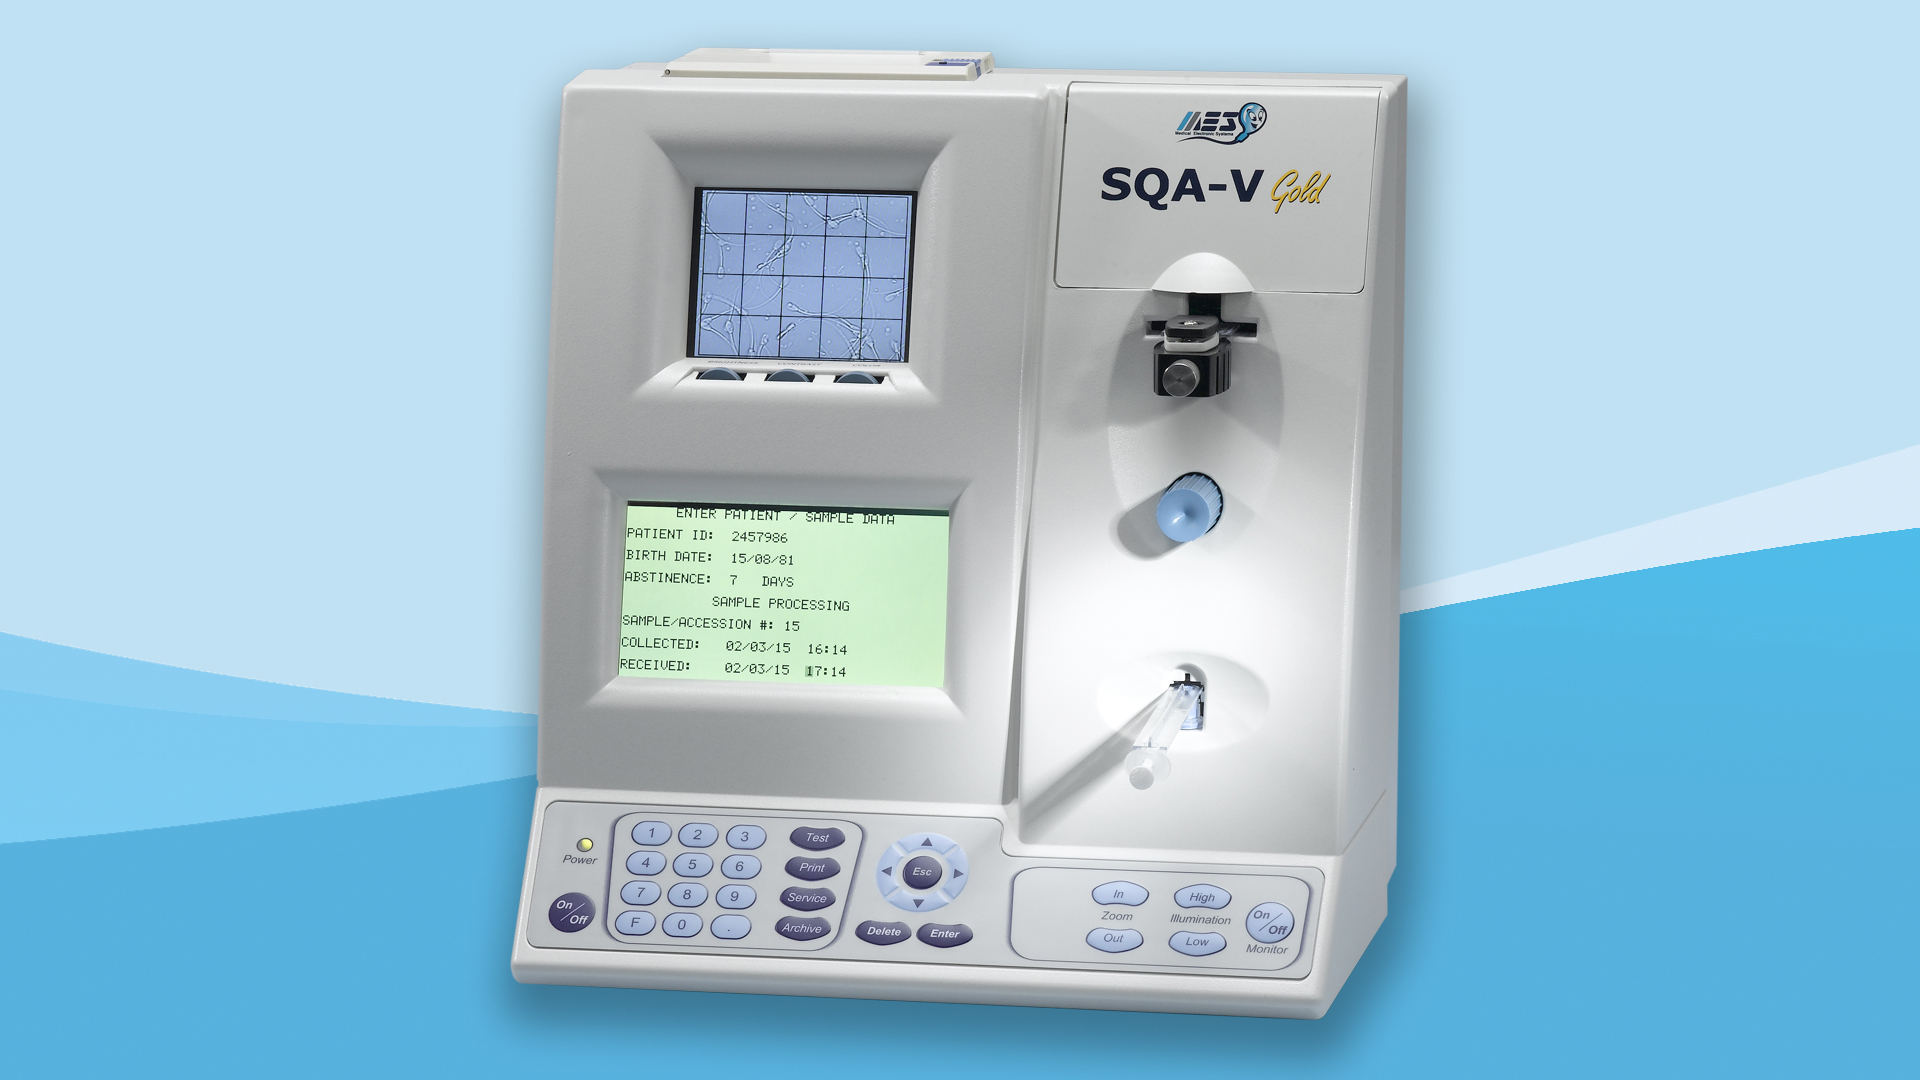 SQA-V automated sperm quality analyzer, reads fresh, frozen, washed and post-vasectomy sperm samples, built-in printer